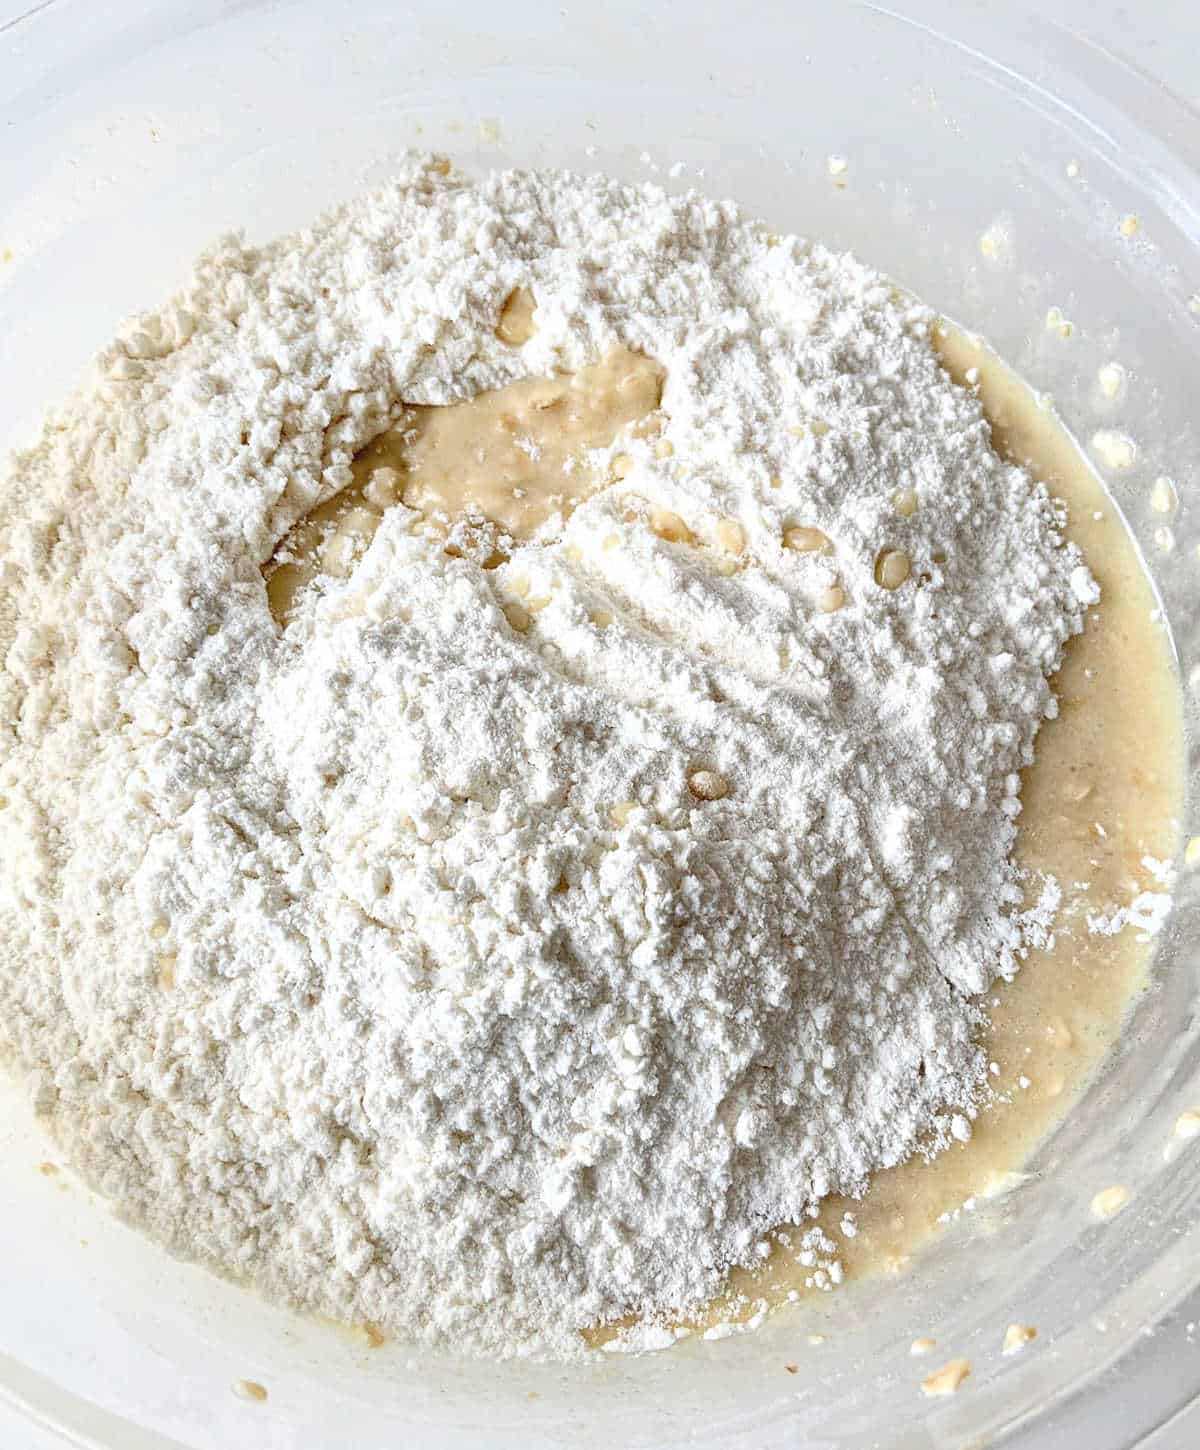 Flour added to oatmeal muffin batter in a glass bowl.